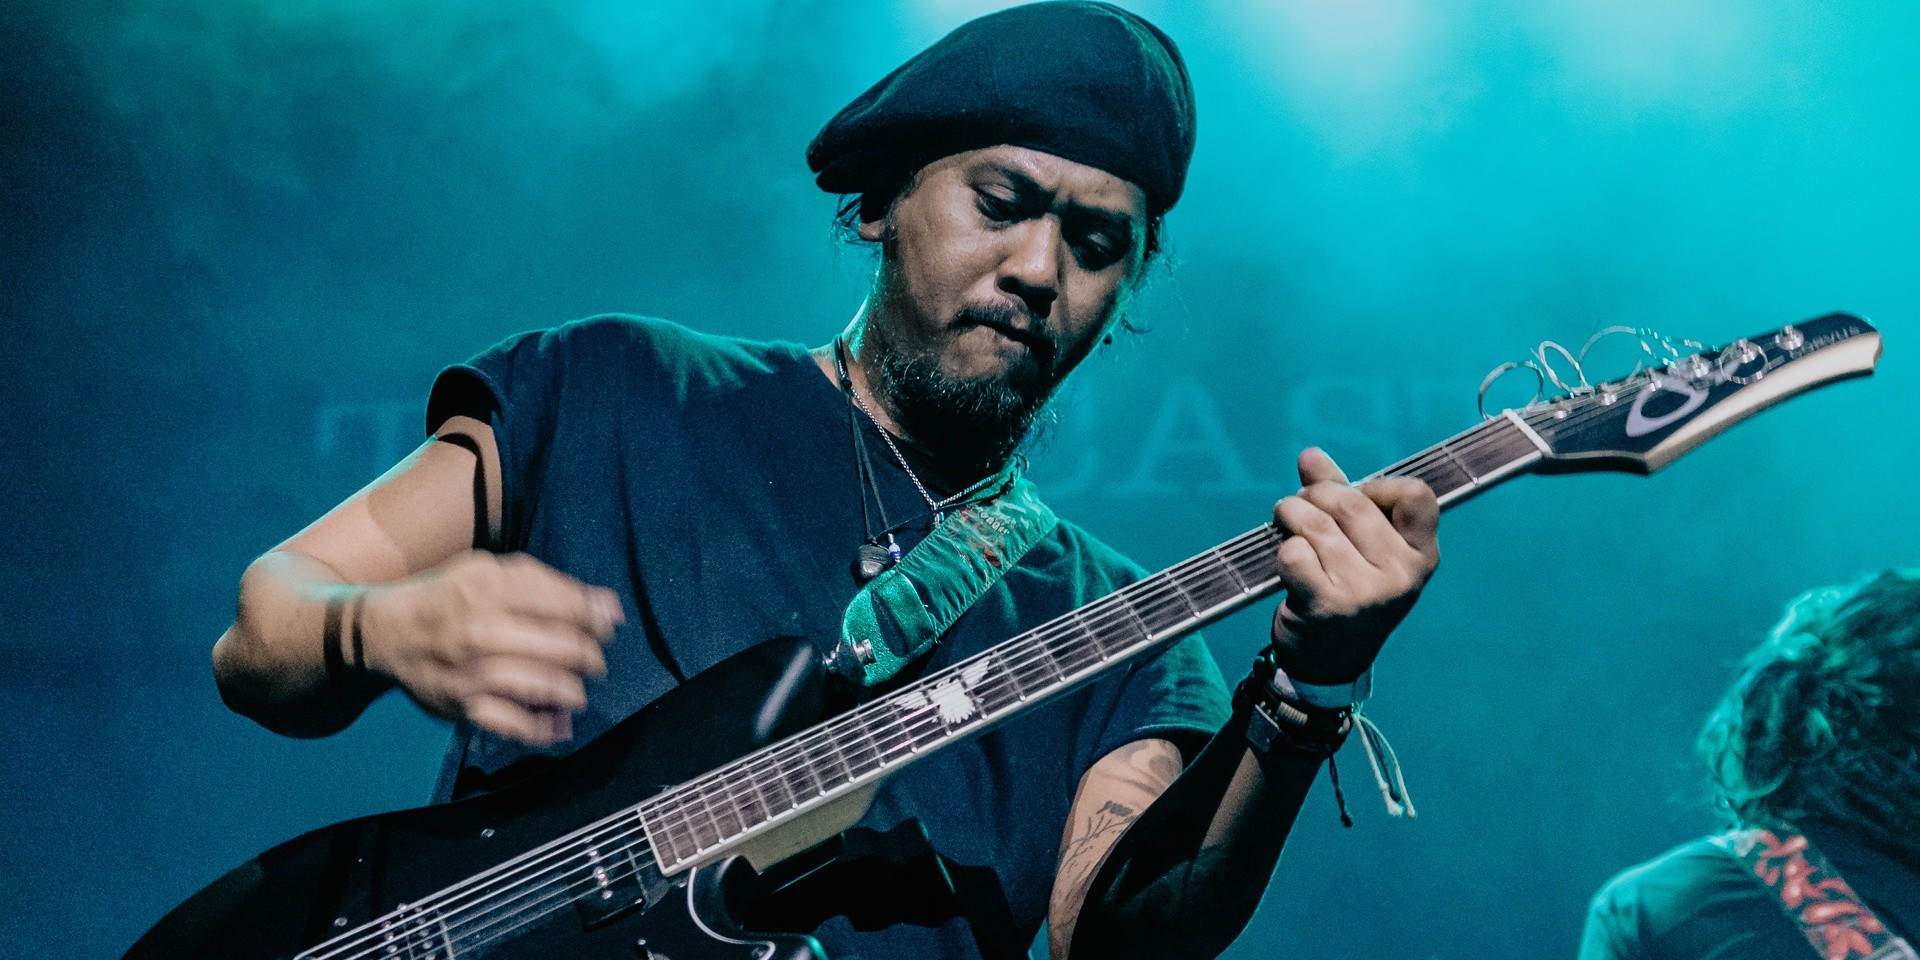 Steve Badiola of Typecast shares update on hit-and-run accident, knee surgery